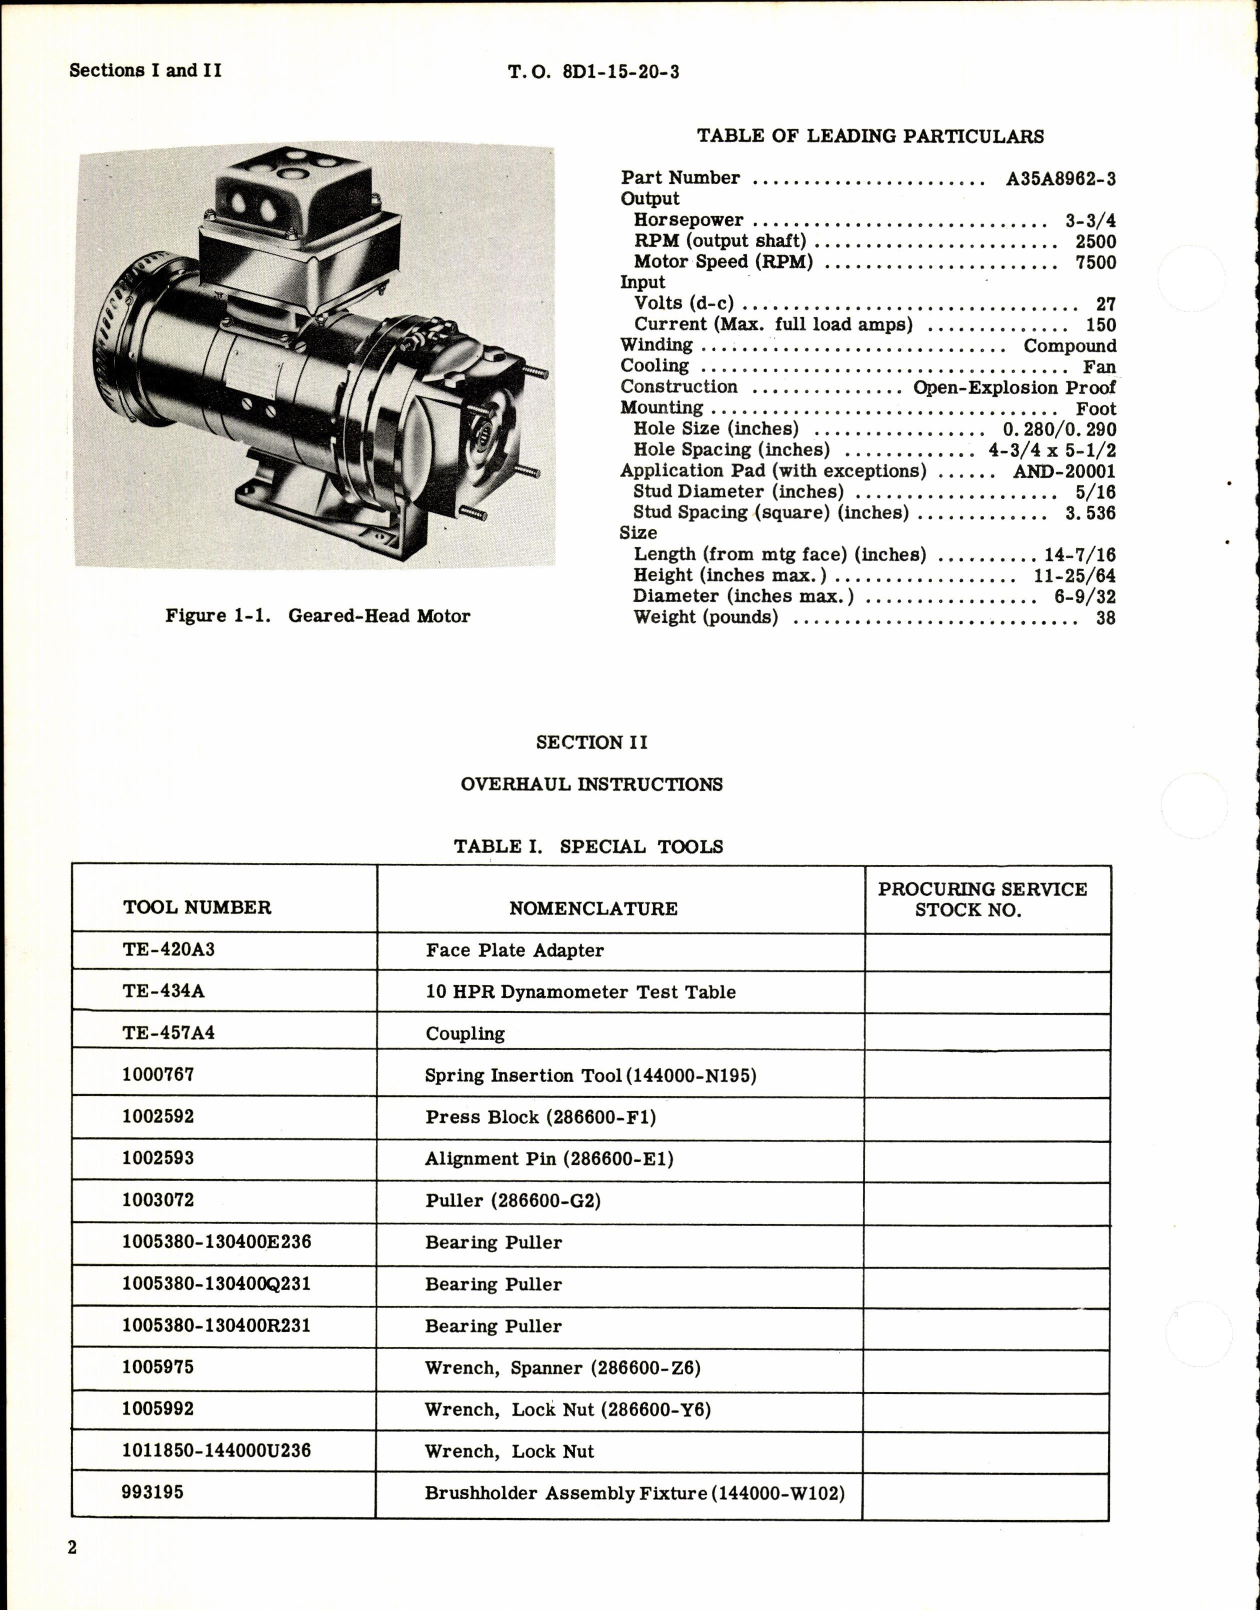 Sample page 4 from AirCorps Library document: Overhaul Instructions for Geared Head D-C Motors